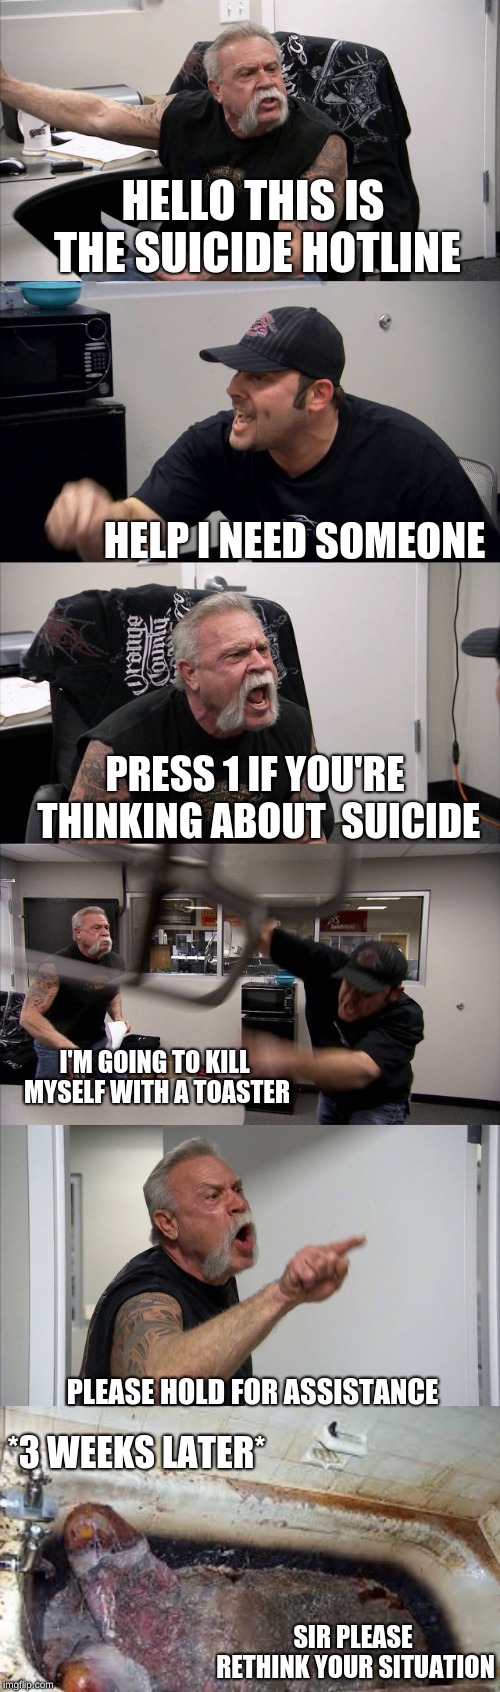 If they only had less callers | HELLO THIS IS THE SUICIDE HOTLINE; HELP I NEED SOMEONE; PRESS 1 IF YOU'RE THINKING ABOUT  SUICIDE; I'M GOING TO KILL MYSELF WITH A TOASTER; PLEASE HOLD FOR ASSISTANCE; *3 WEEKS LATER*; SIR PLEASE RETHINK YOUR SITUATION | image tagged in memes,american chopper argument,suicide hotline,too late | made w/ Imgflip meme maker